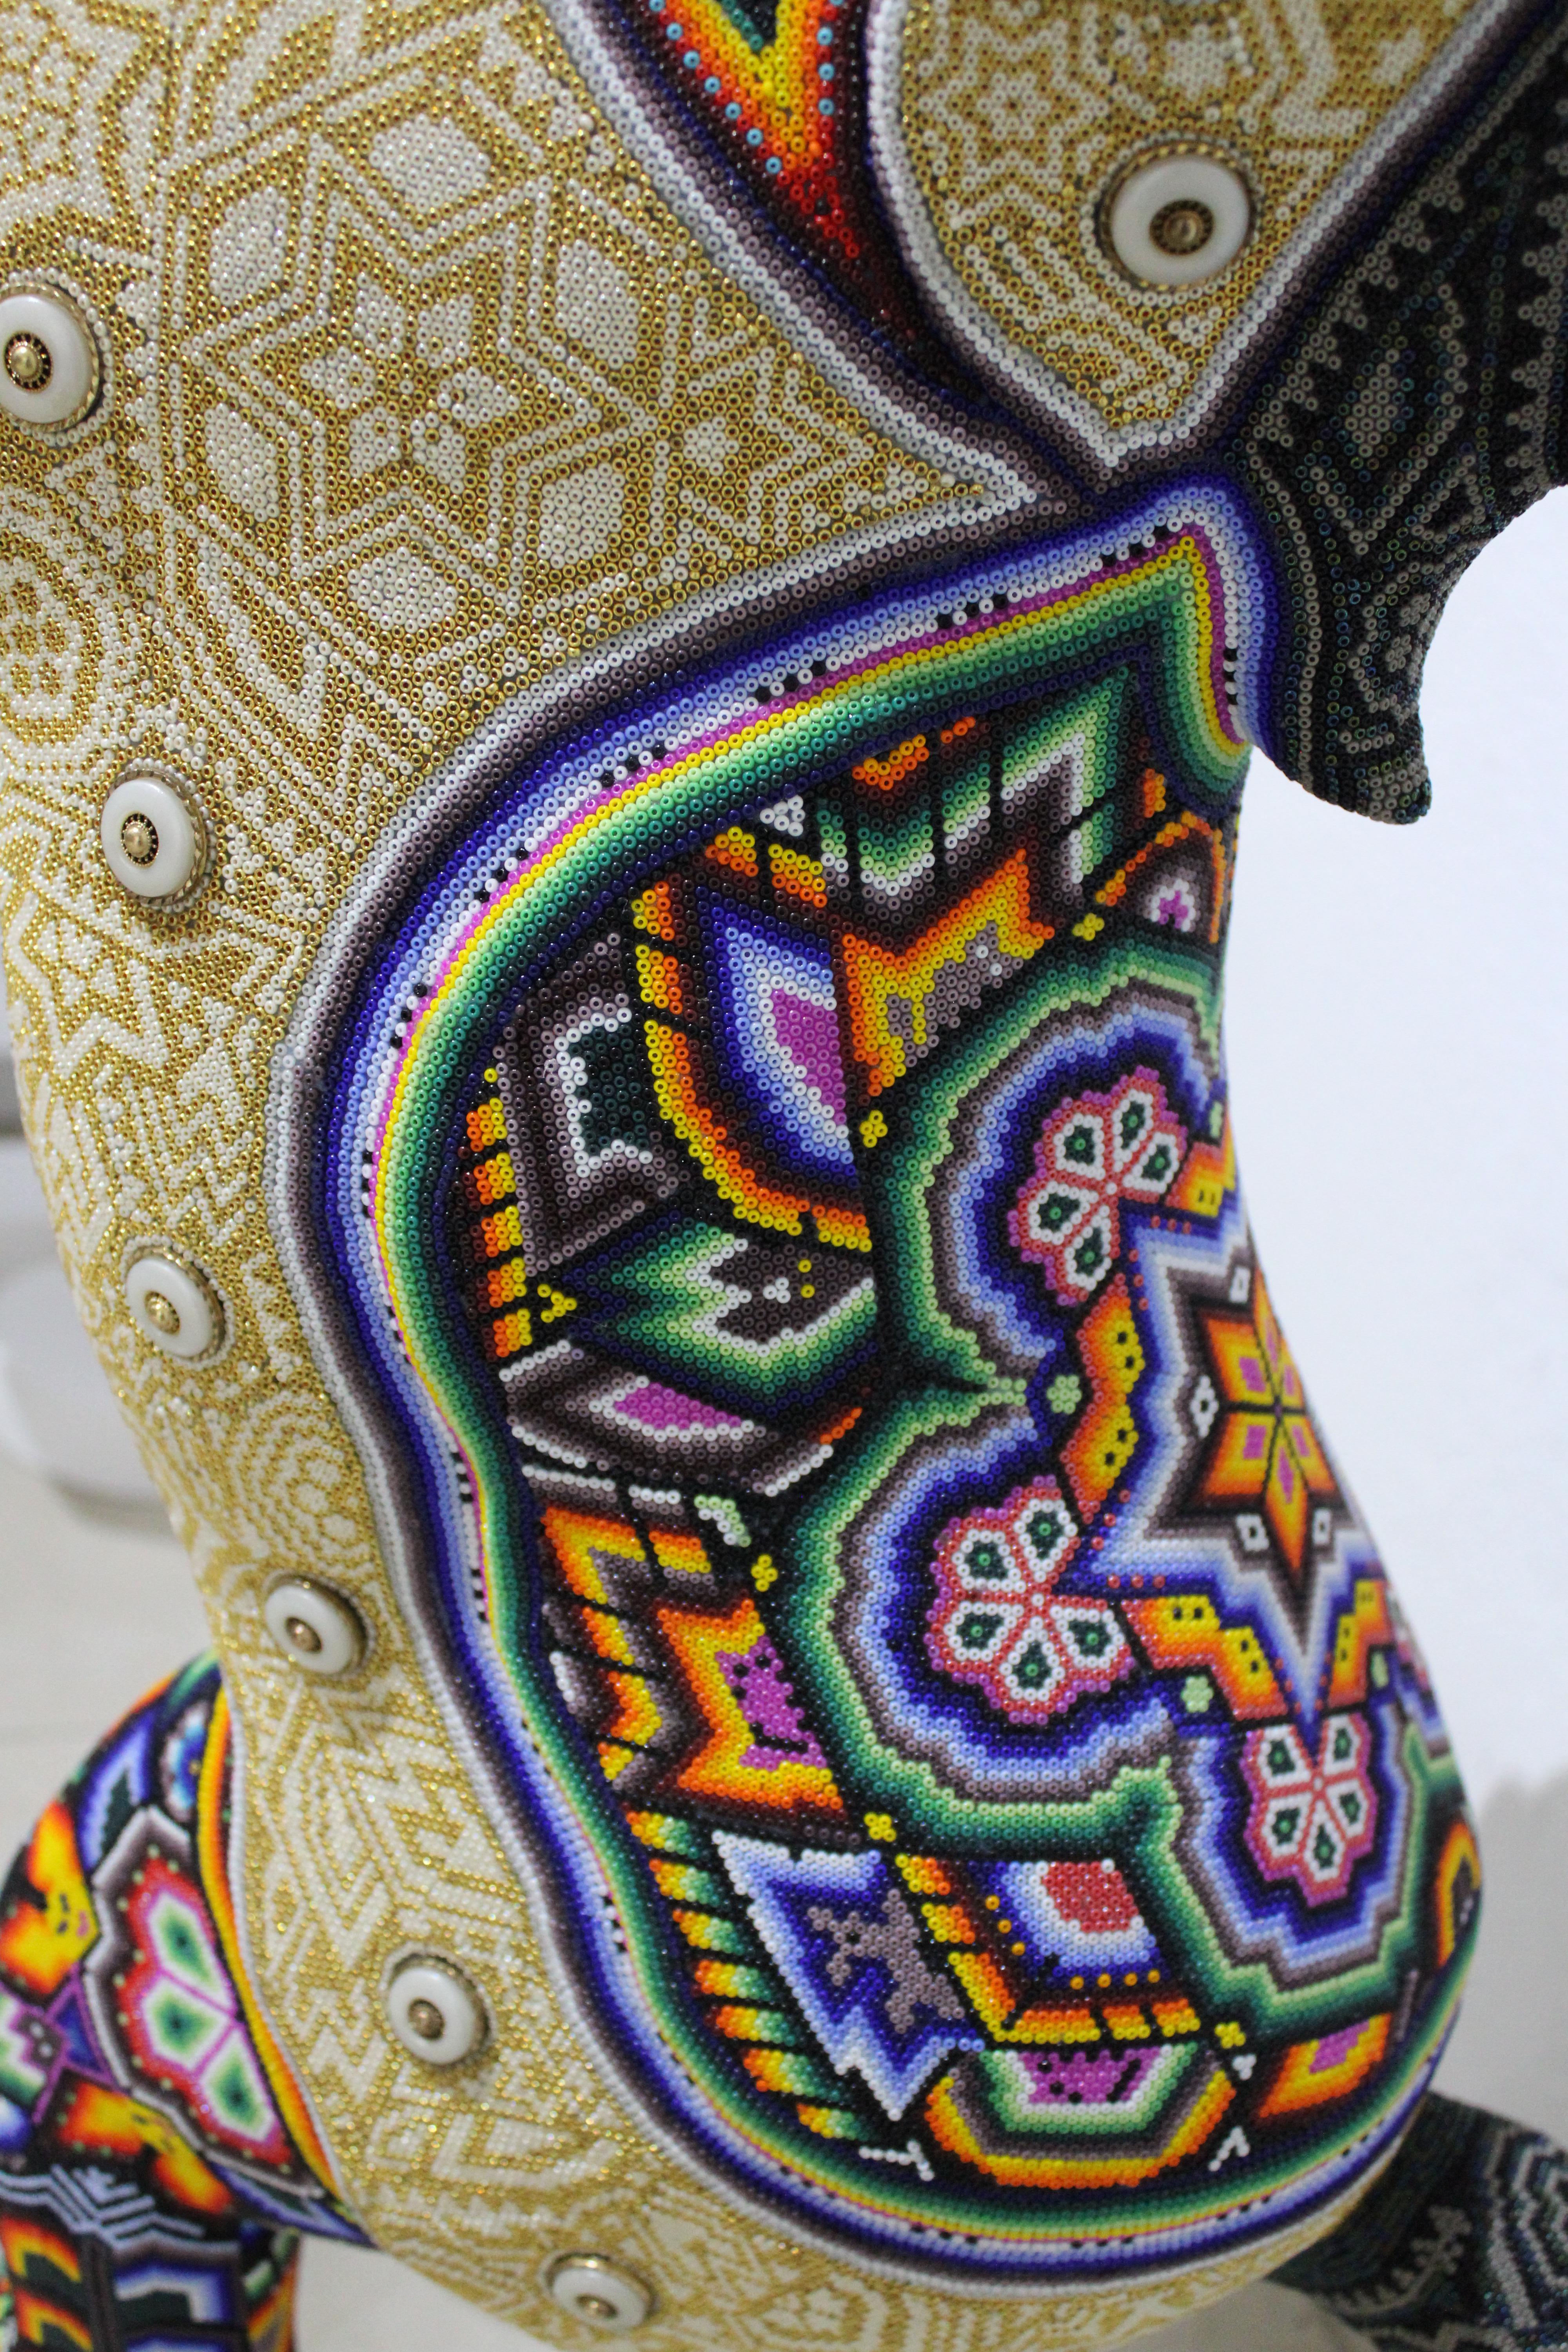 ALTERATION ART . . . is a collaboration process between Rick Wolfryd, fine artist and art dealer with over 40 years experience, and various Mexican Huichol artists and Mexican Huichol art studios that Rick has been drawn to, after 10 plus years of